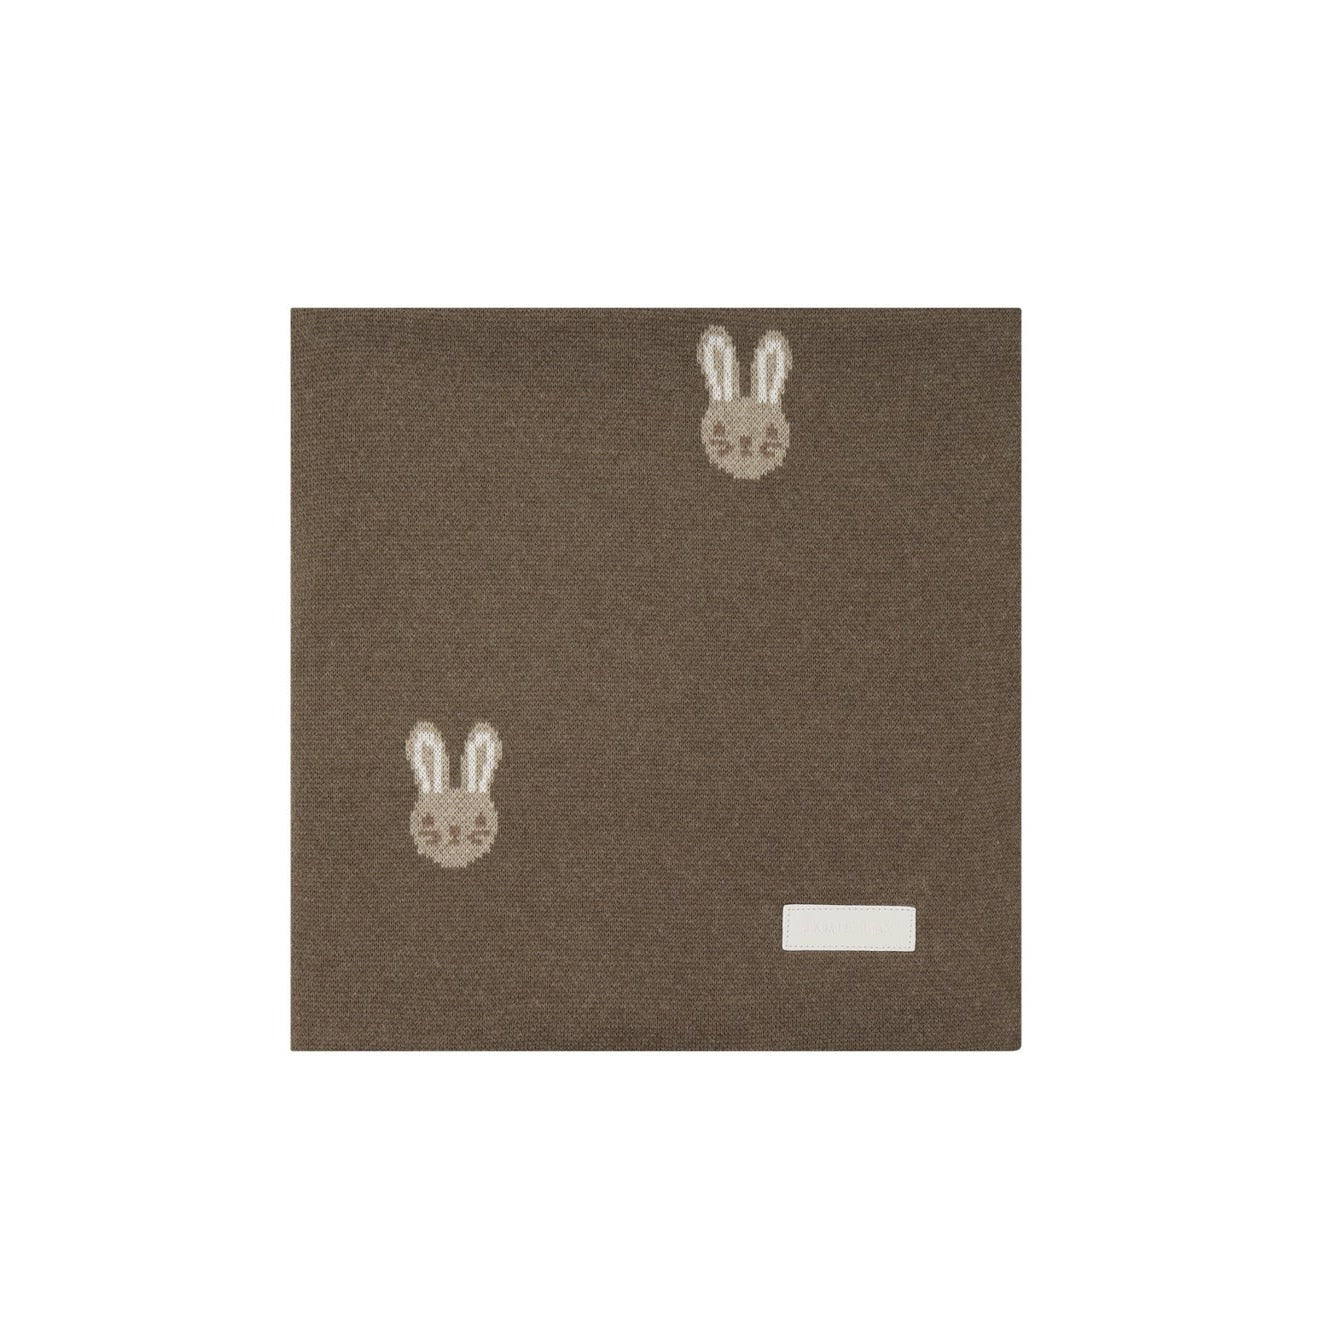 Bunny Knitted Blanket - Sepia Marle